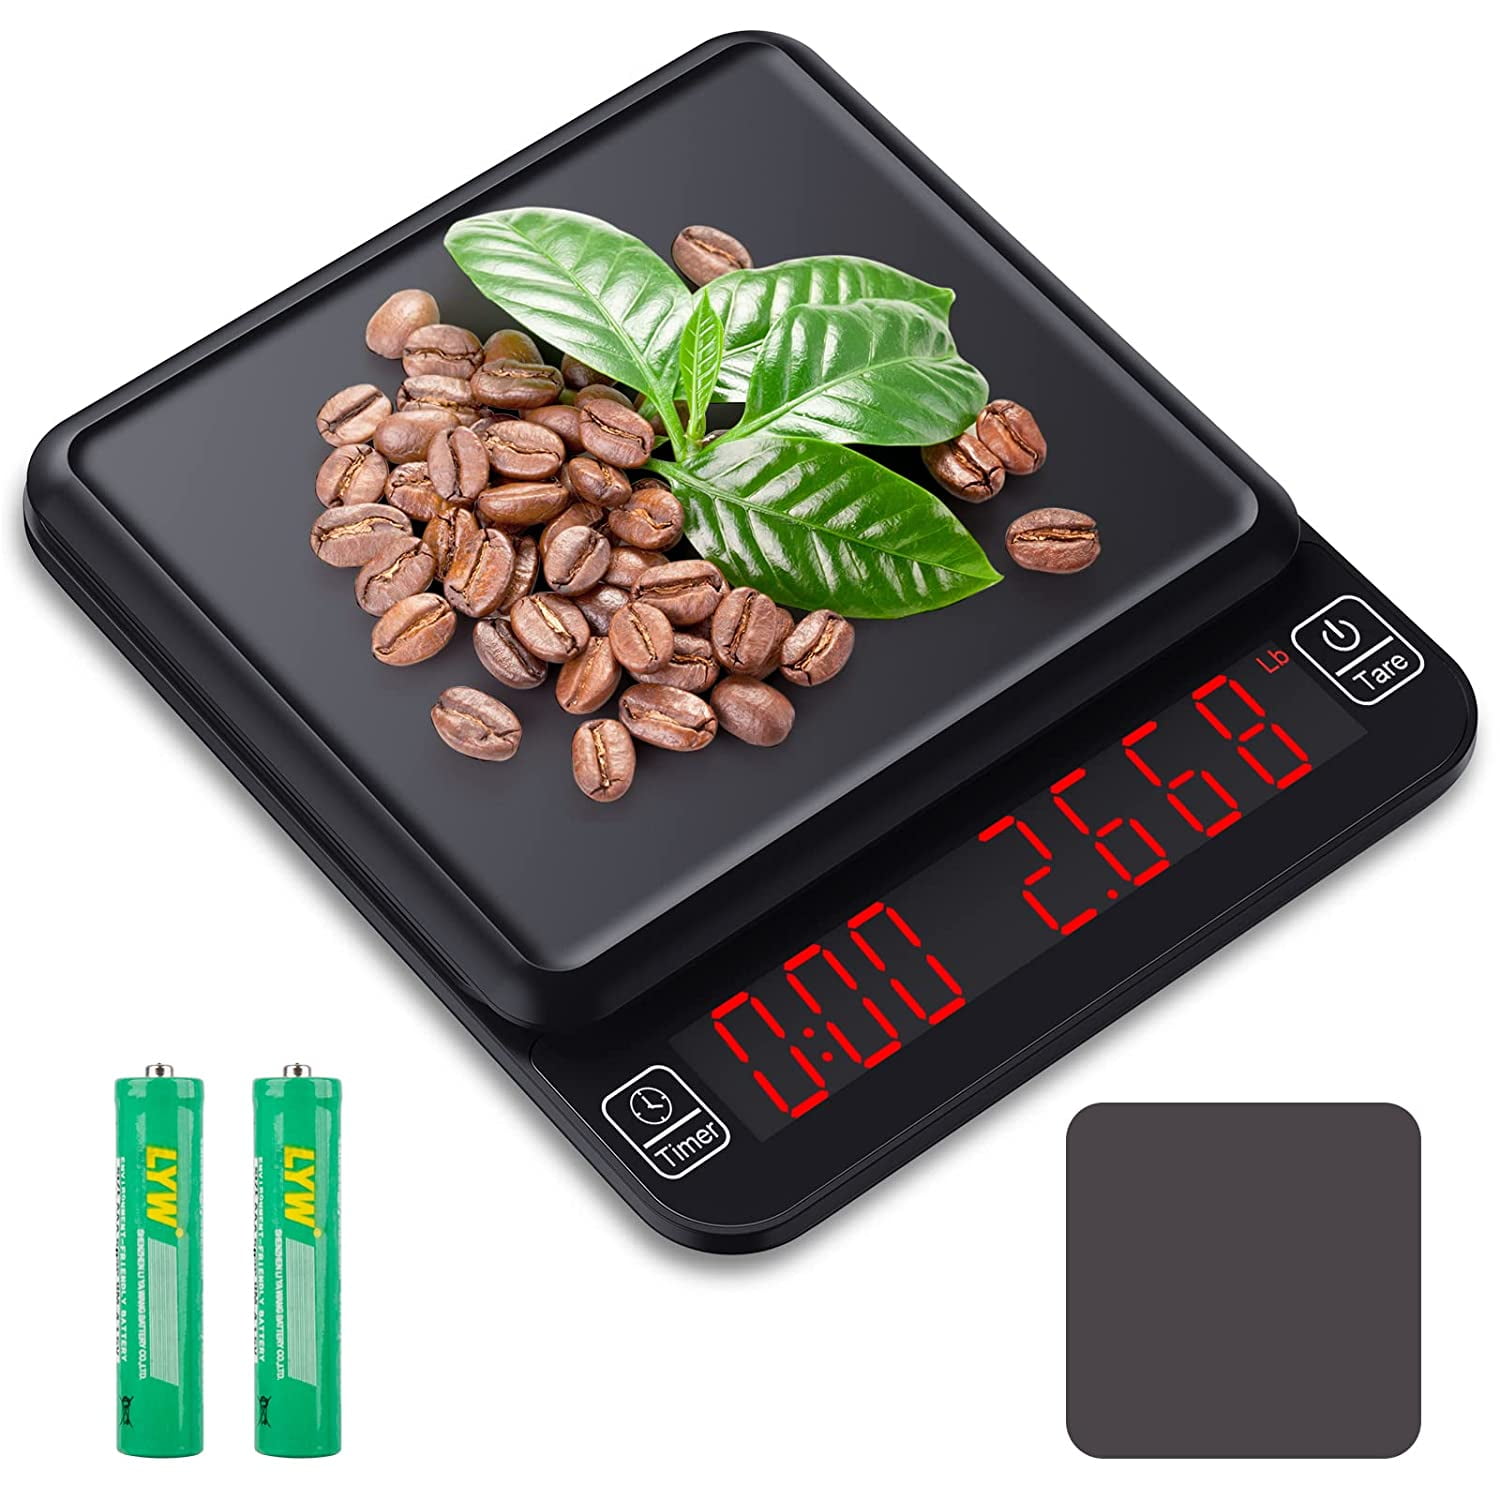 Electronic 3kg LCD Digital Drip Coffee Scale with Timer – BaristaSpace  Espresso Coffee Tool including milk jug,tamper and distributor for sale.